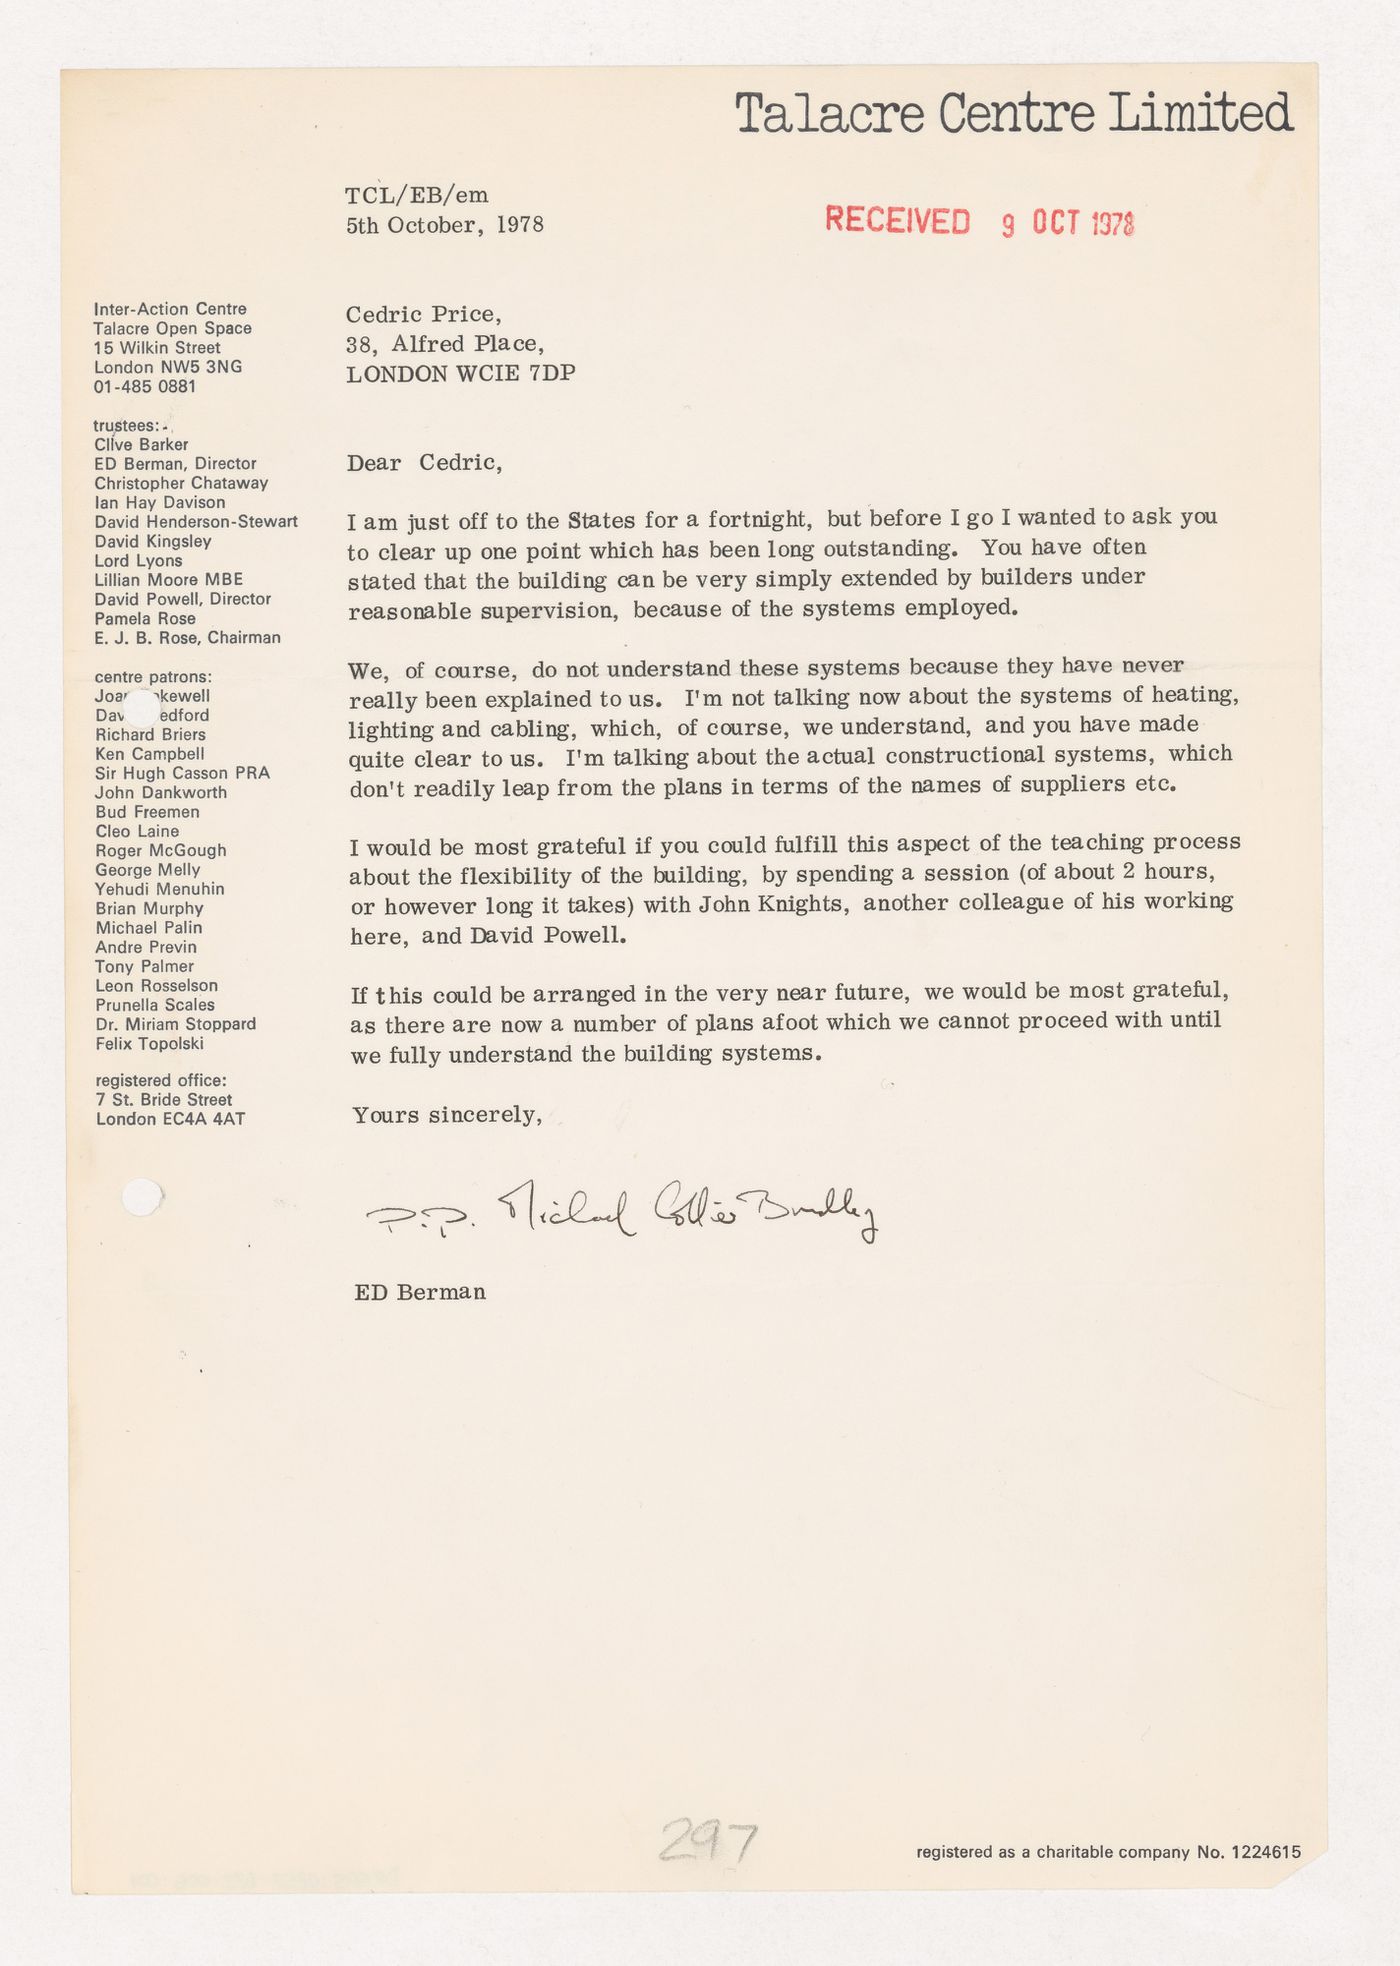 Letter from Ed Berman to Cedric Price about the Inter-Action Centre